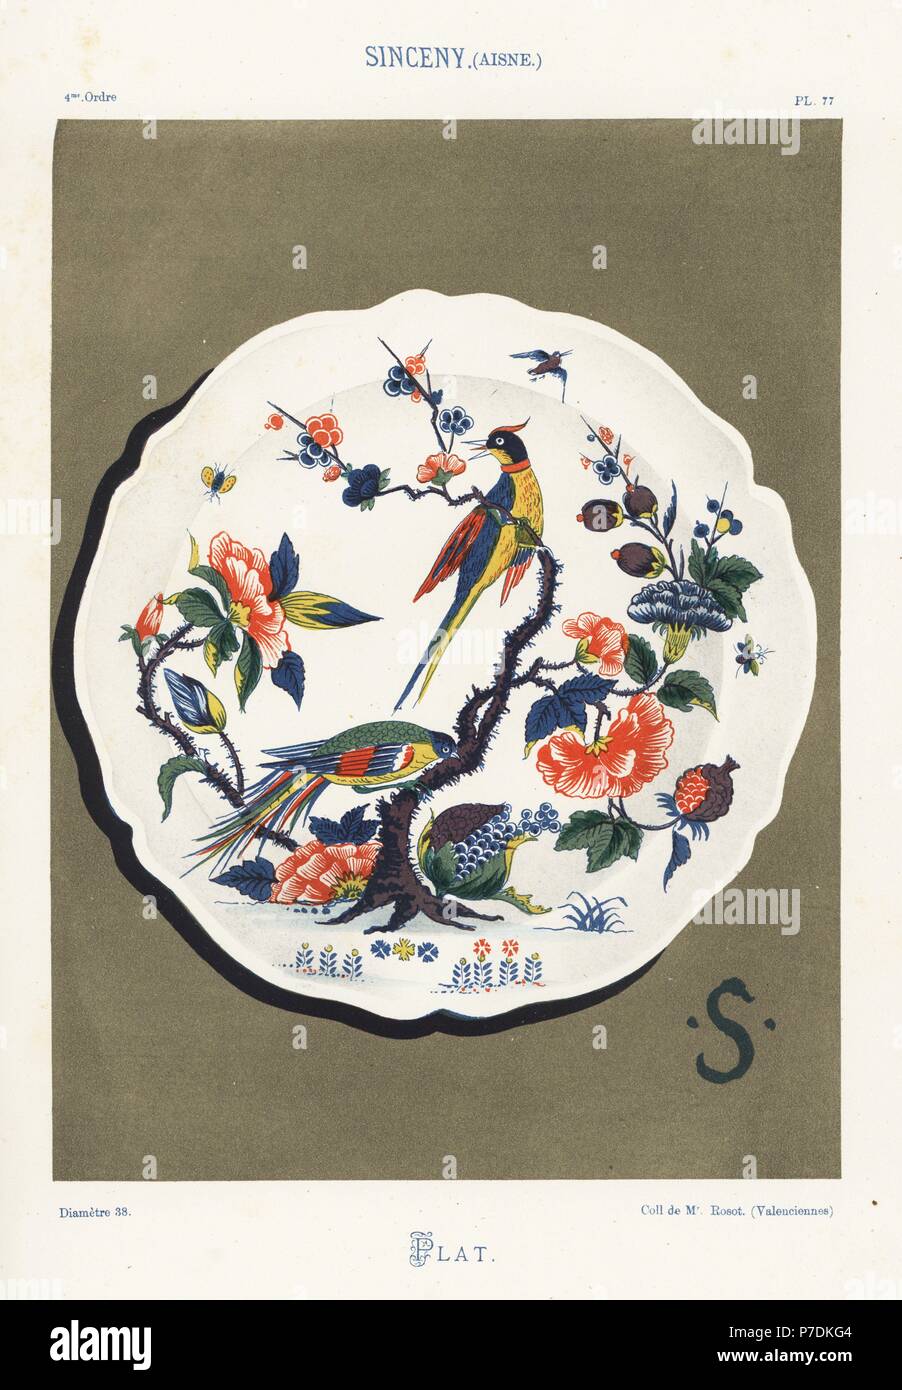 Plate from Sinceny, France, 18th century, Oriental landscape with birds and flowers. Hand-finished chromolithograph from Ris Paquot's General History of Ancient French and Foreign Glazed Pottery, Chez l'Auteur, Paris, 1874. Stock Photo